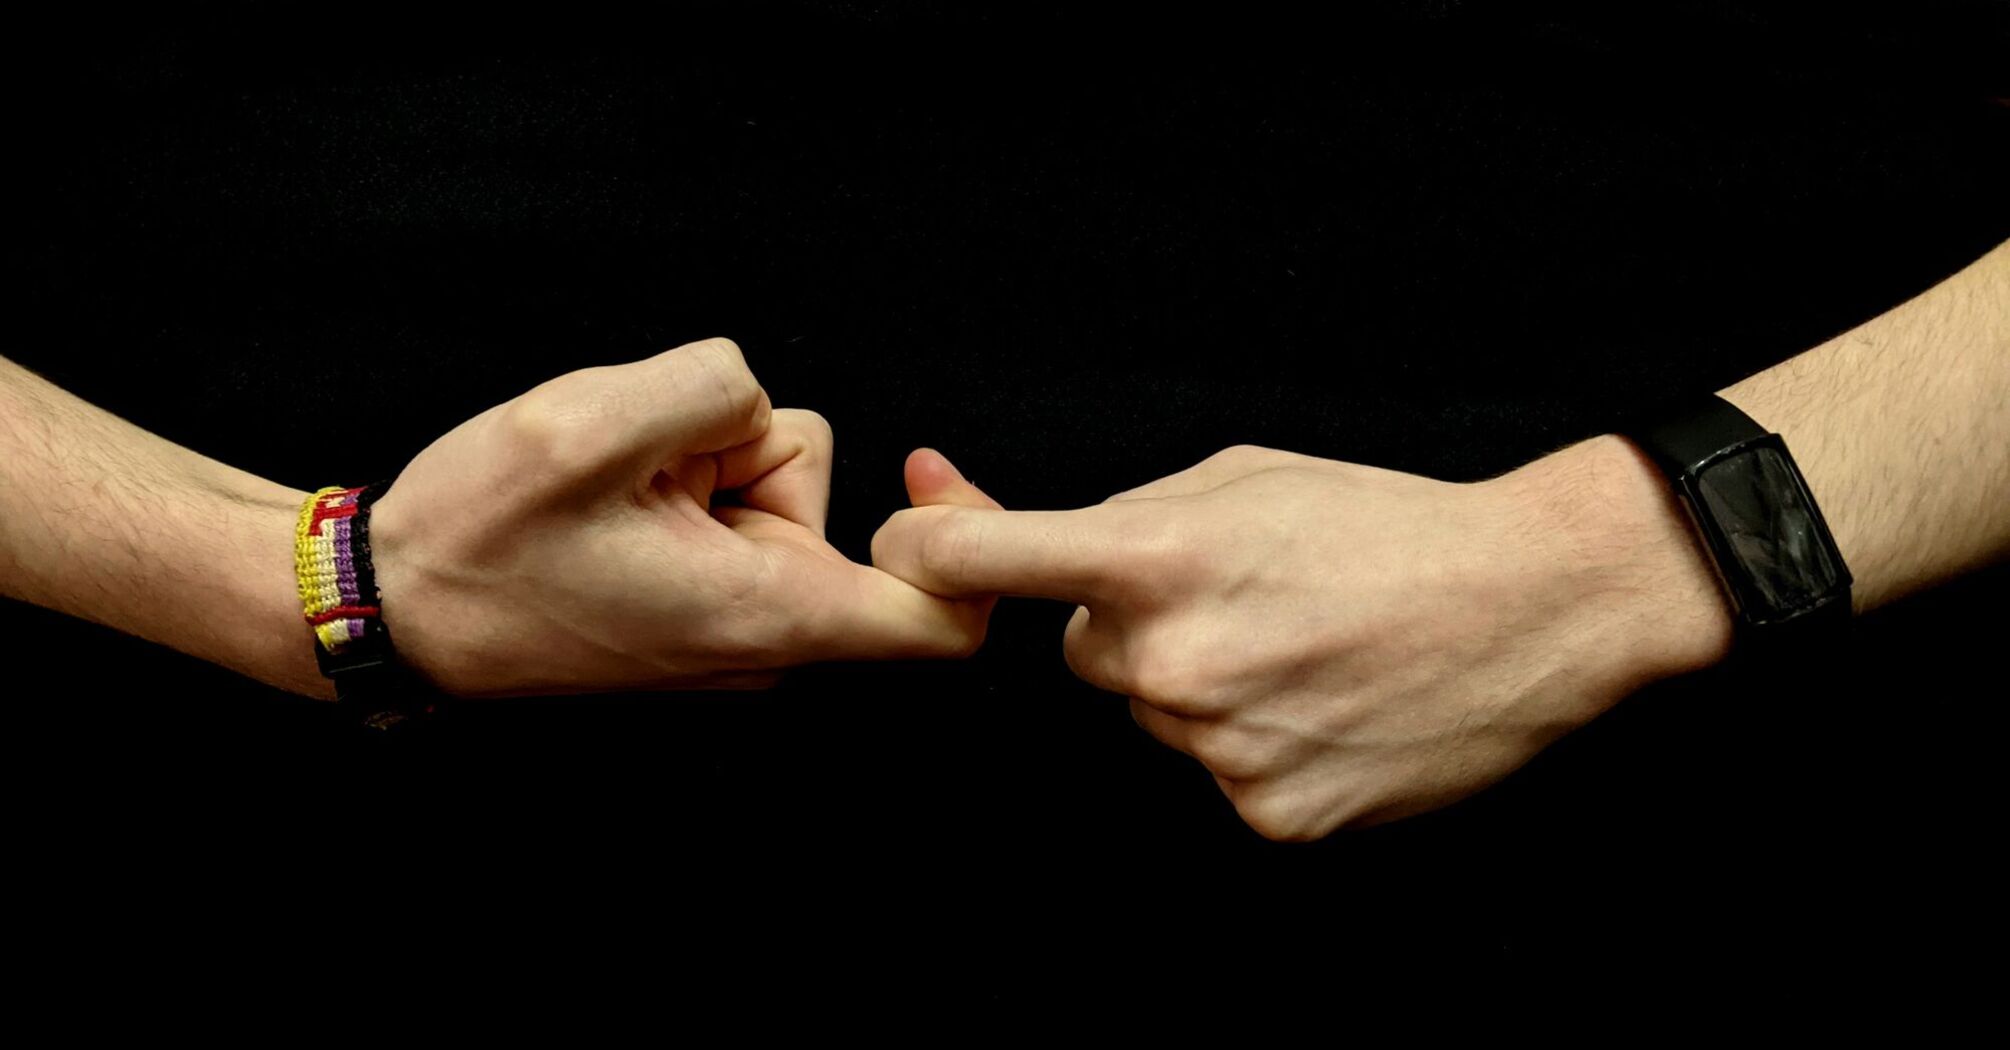 Two hands demonstrating a sign language gesture against a black background